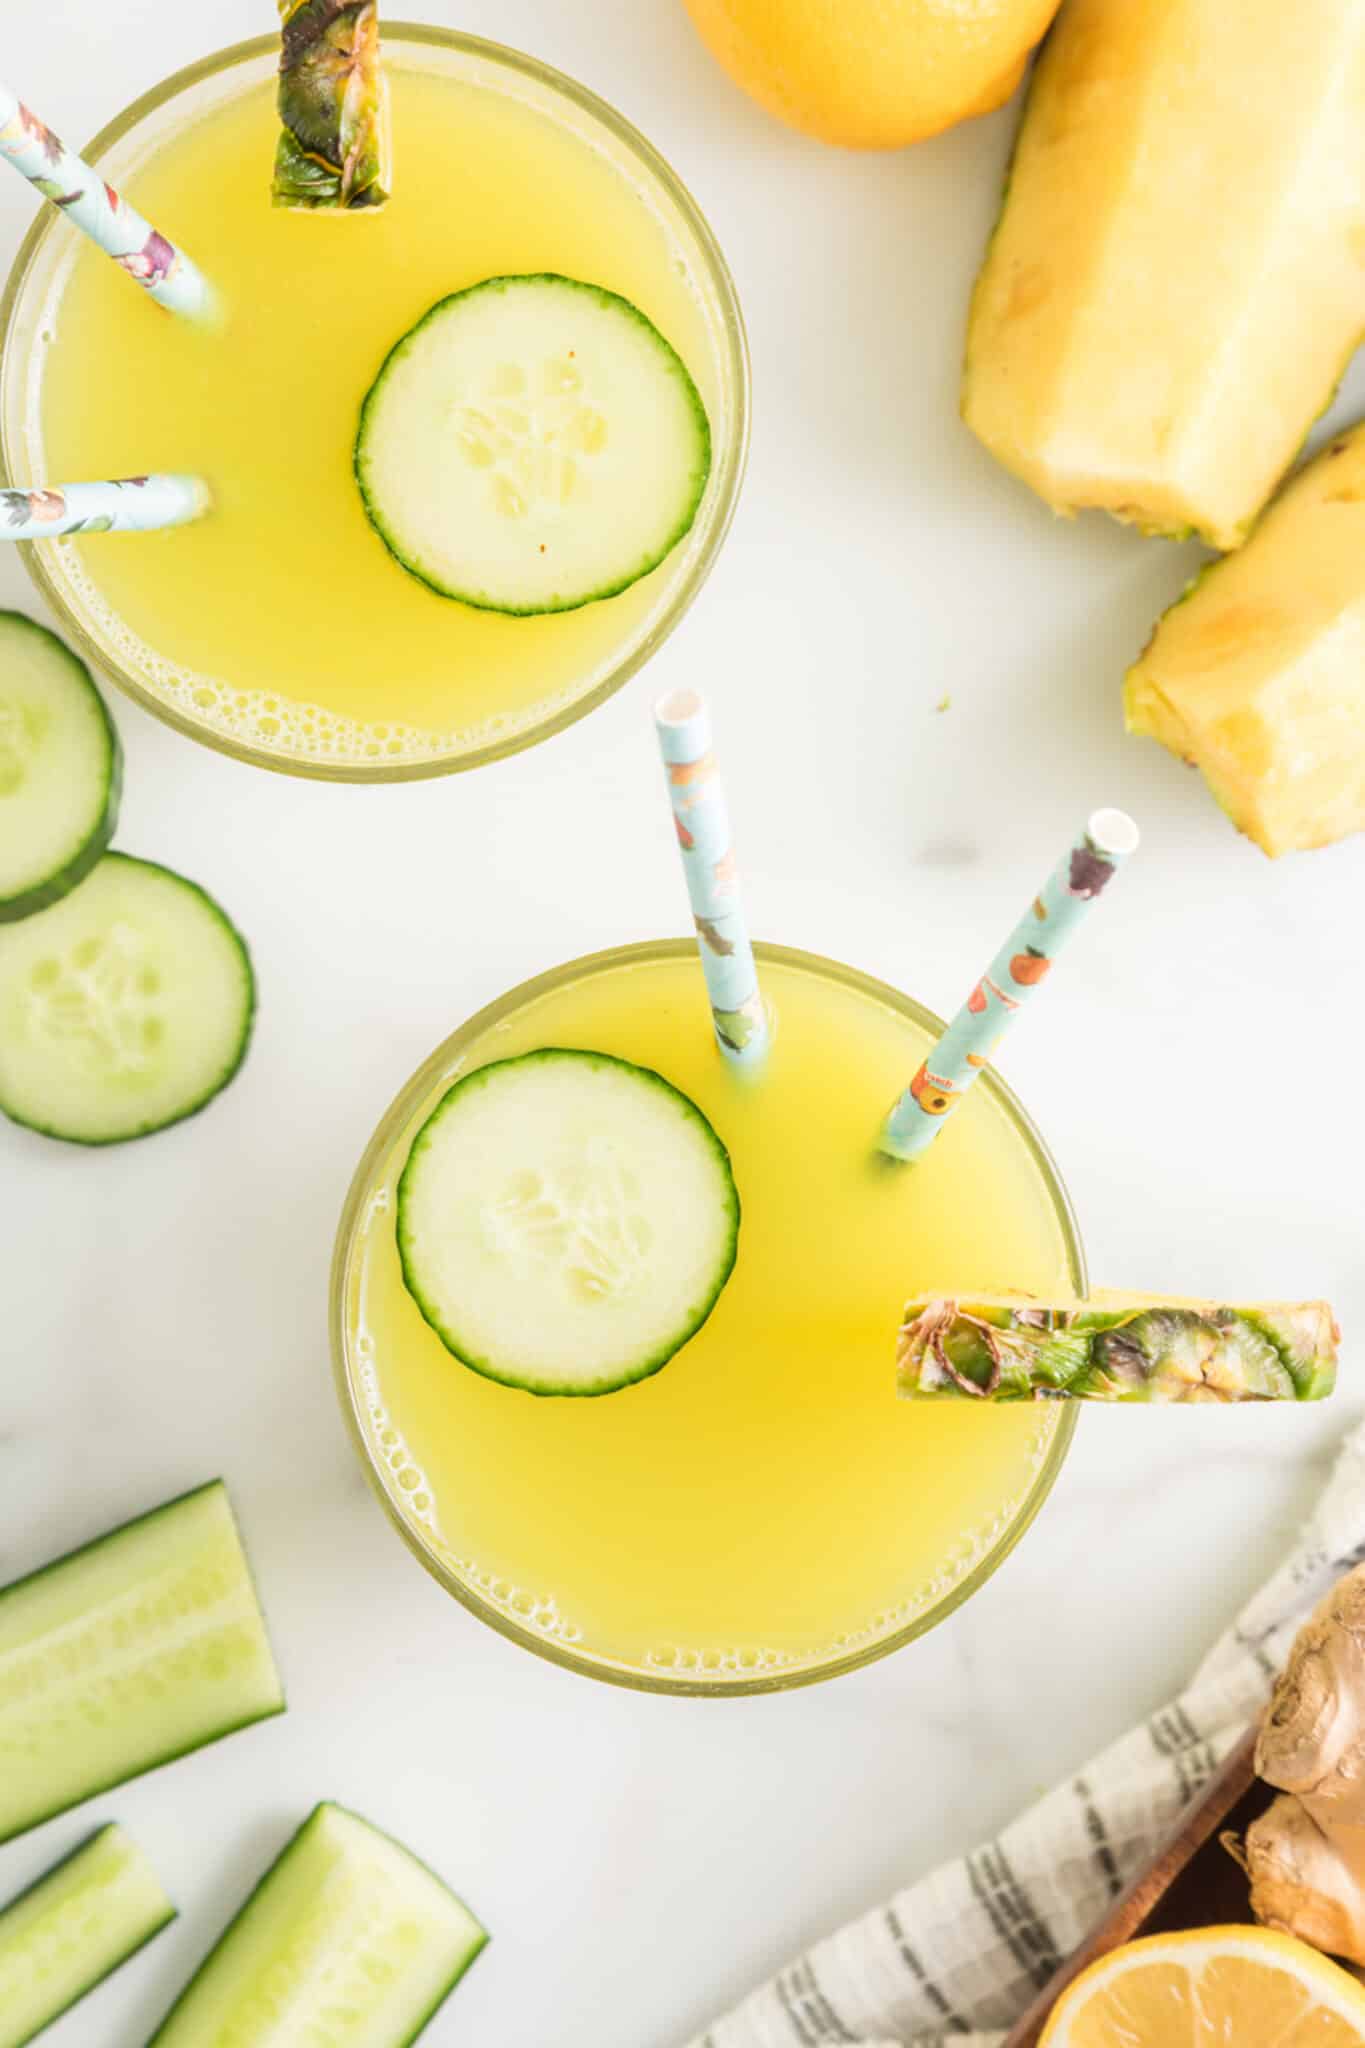 Top view of two glasses of pineapple cucumber juice each with two straws.